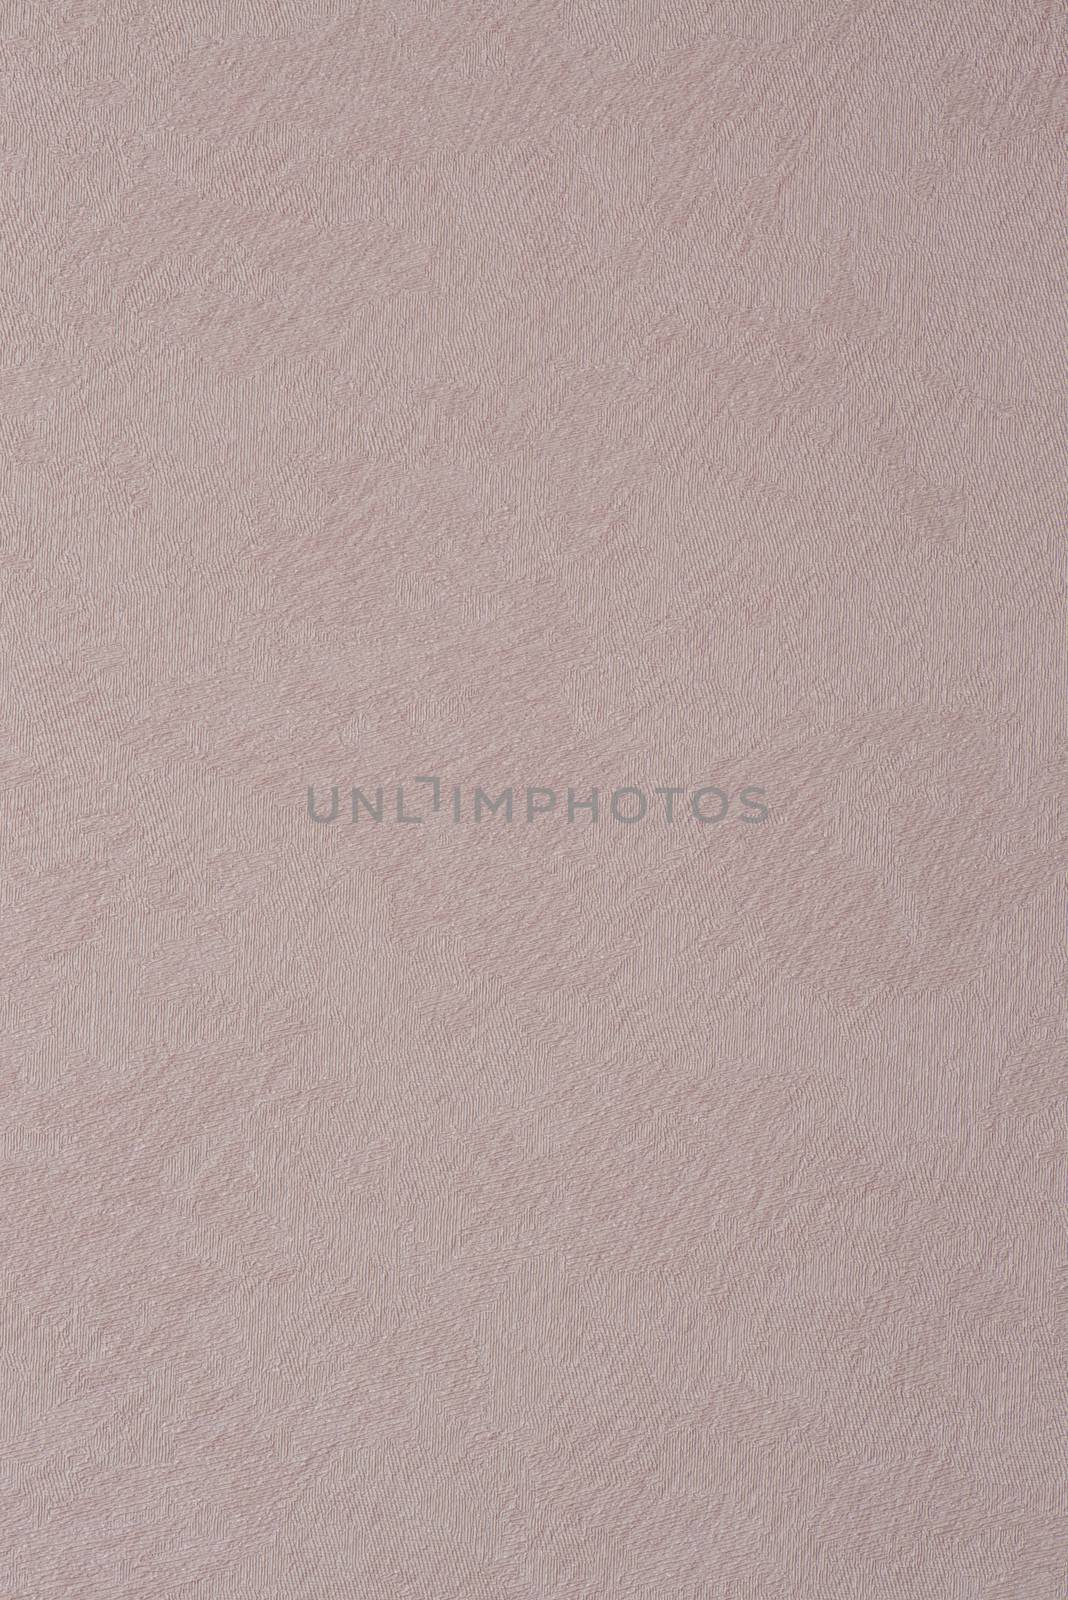 Pink wallpaper embossed texture for background.